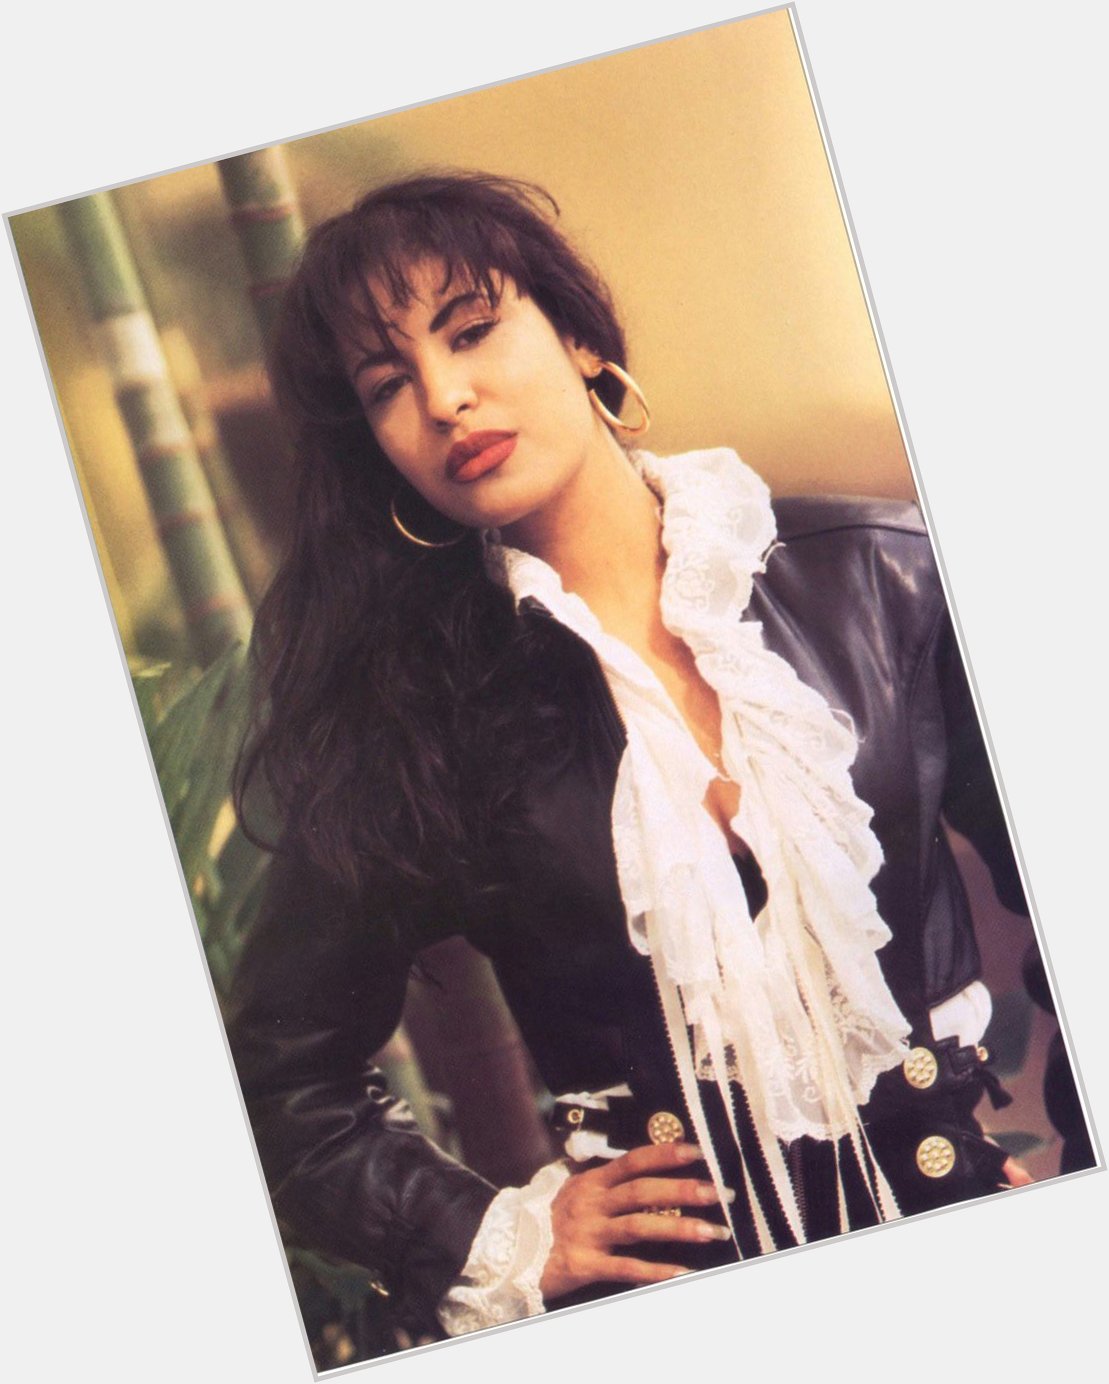 Selena Quintanilla Pérez would have turned 51 yesterday.   Happy Heavenly Birthday Queen 